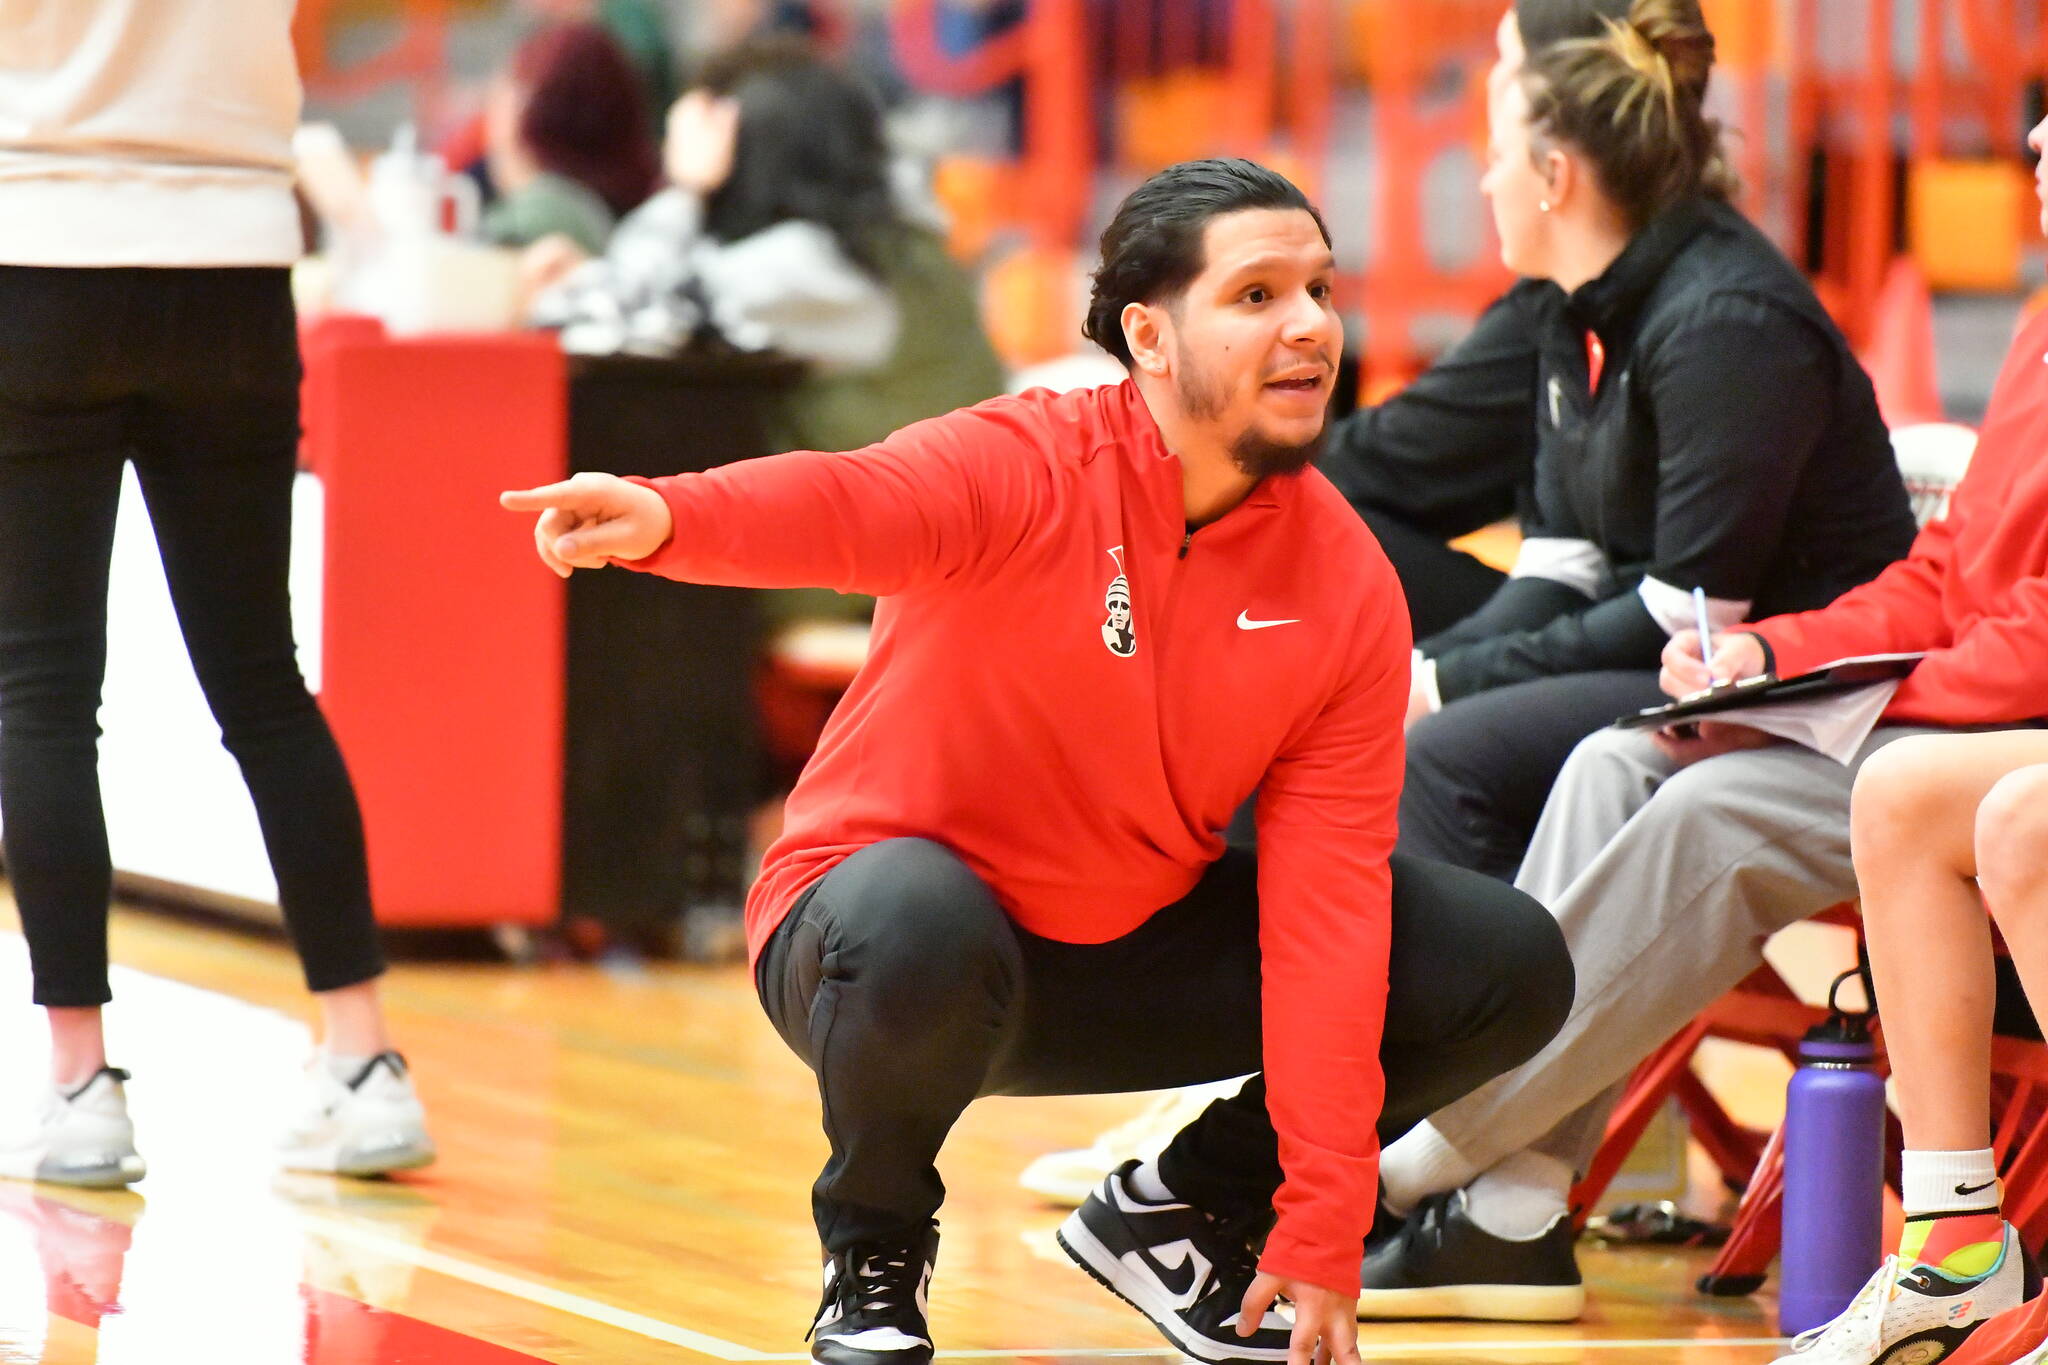 Jay Franco has been named the head coach of the Everett Community College women’s basketball team. (Photo courtesy of Everett Community College)